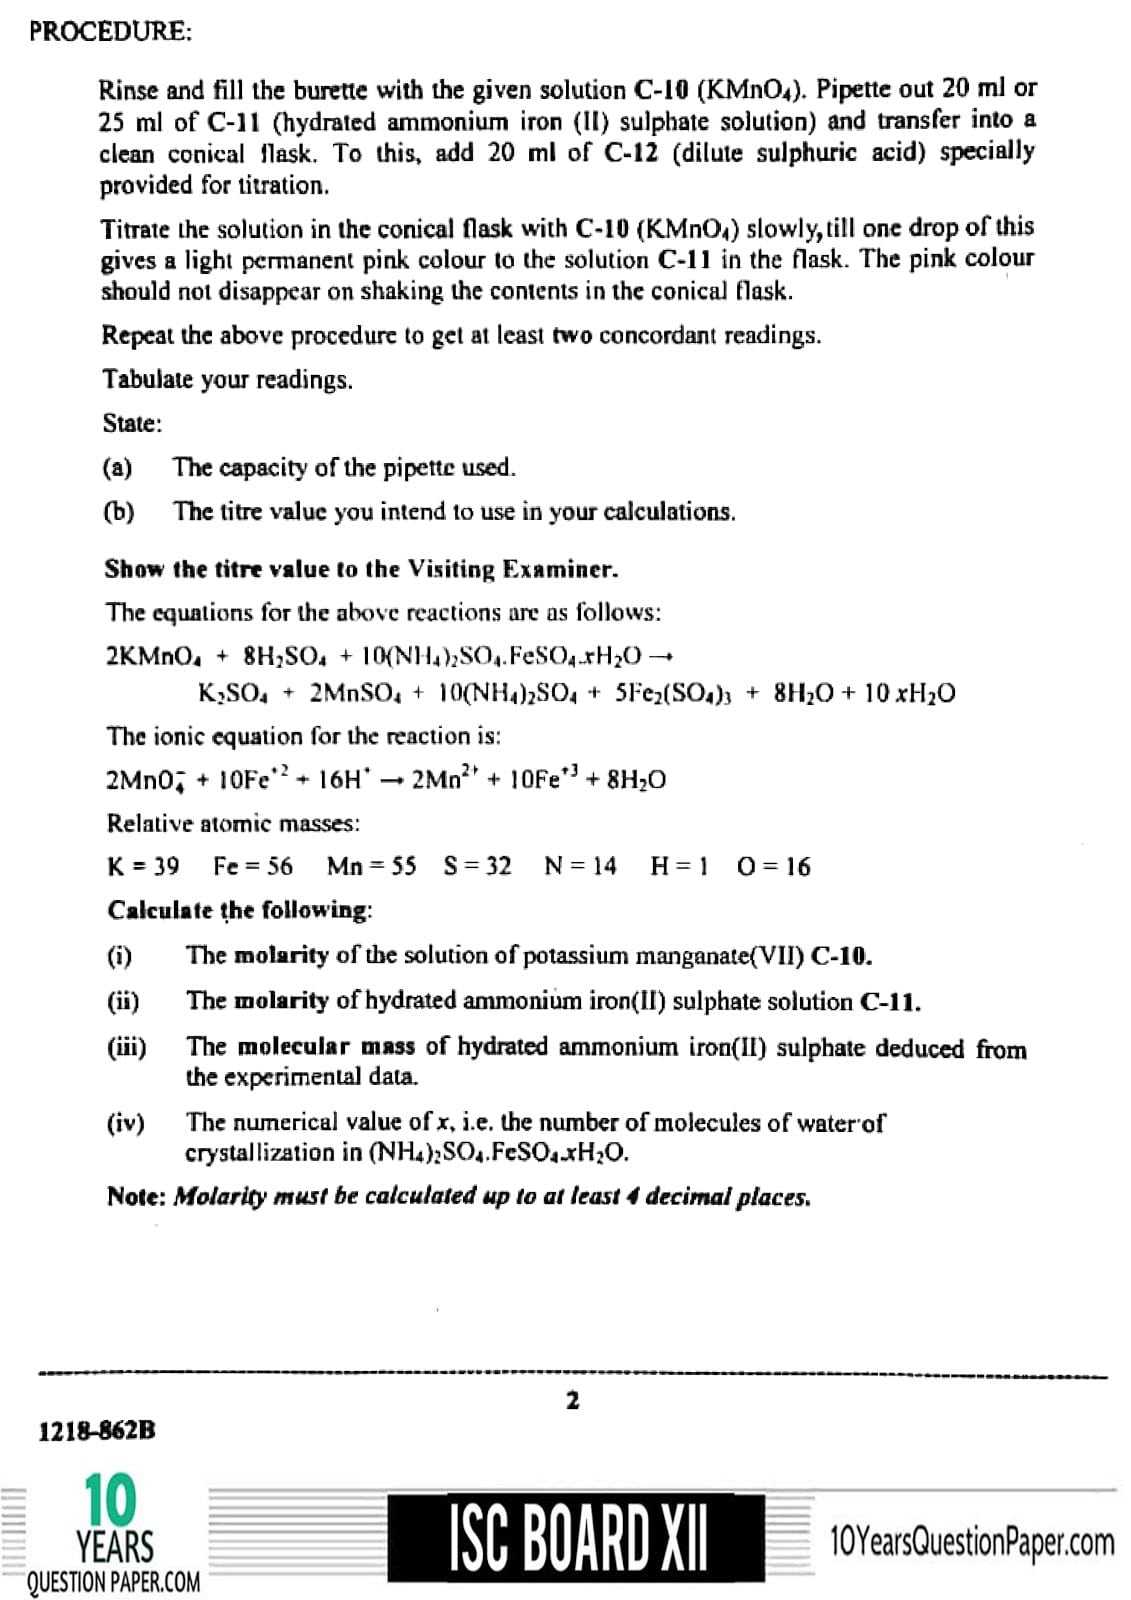 ISC Class 12 Chemistry Practical 2018 Question Paper